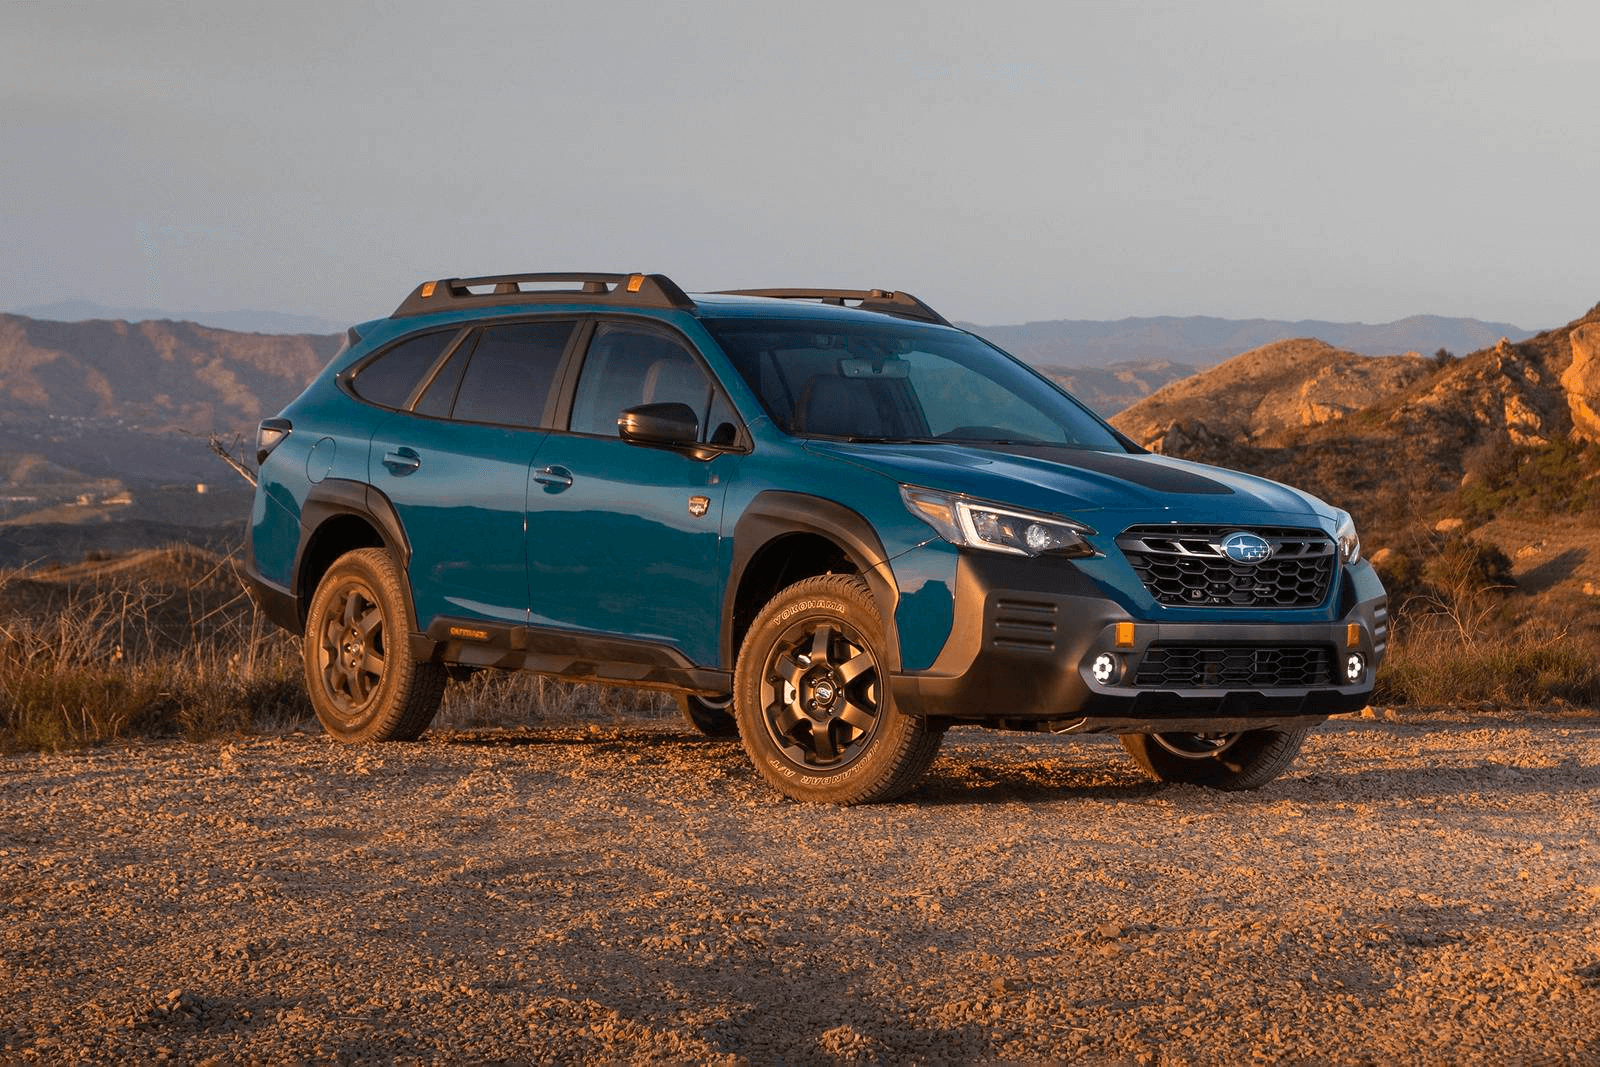 Top car camping vehicles for stargazing - Carvana Blog